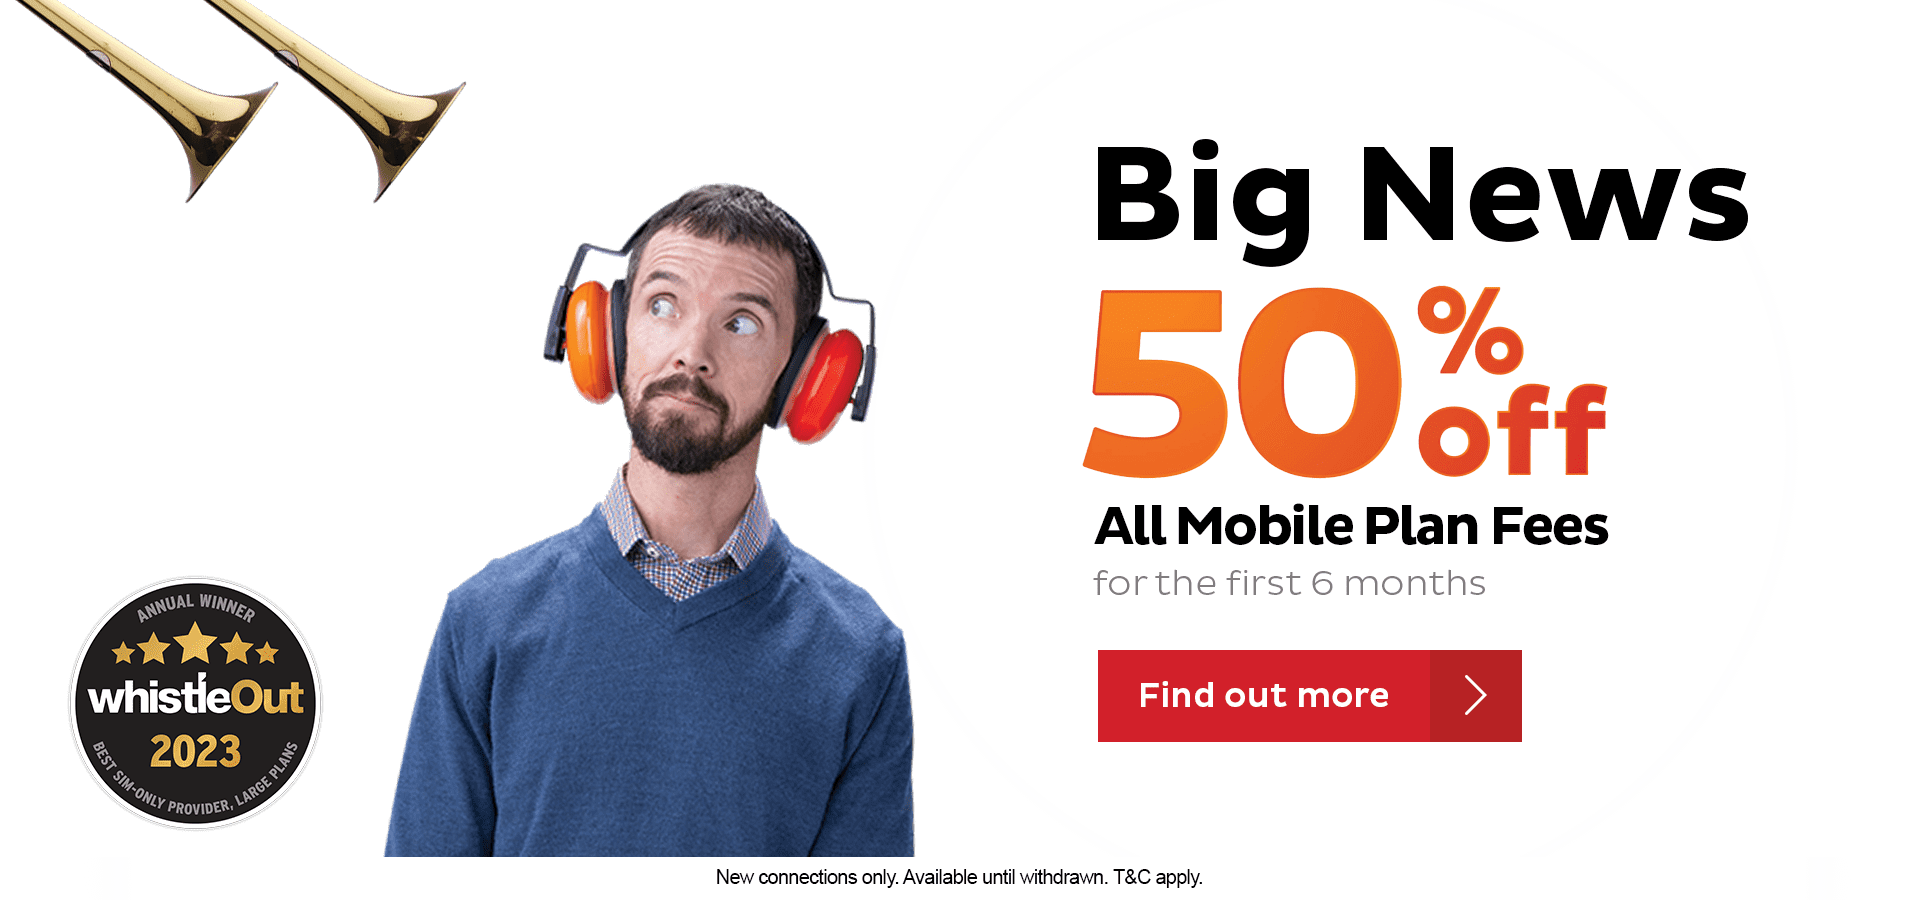 iiNet Mobile: 50% off all plan fees for the first 6 months. New mobile customers only